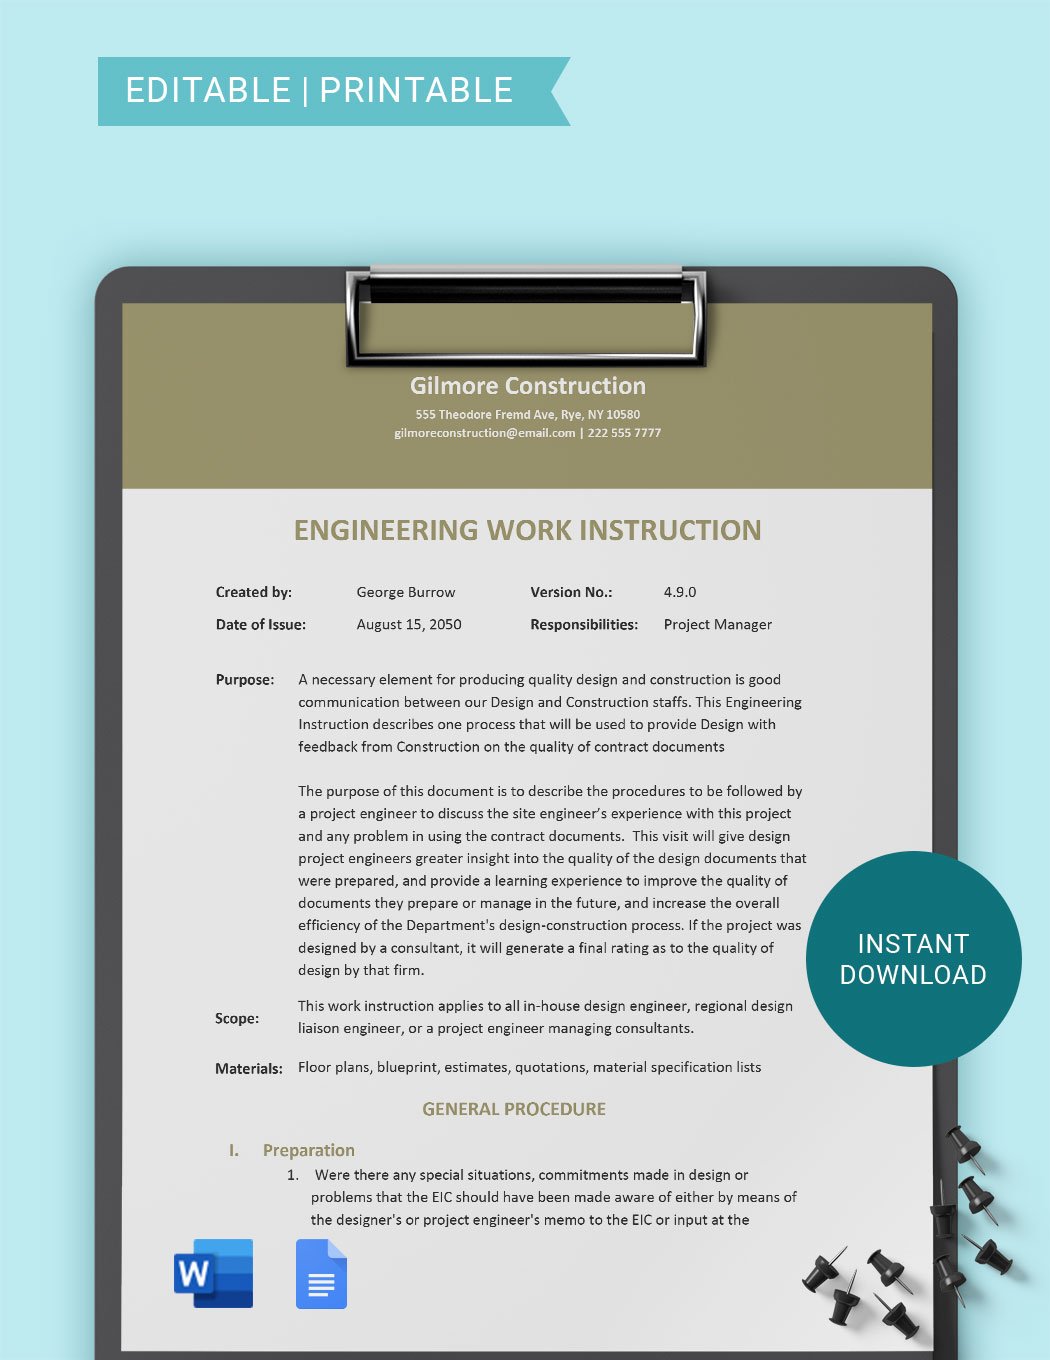 Engineering Work Instruction Template in Word